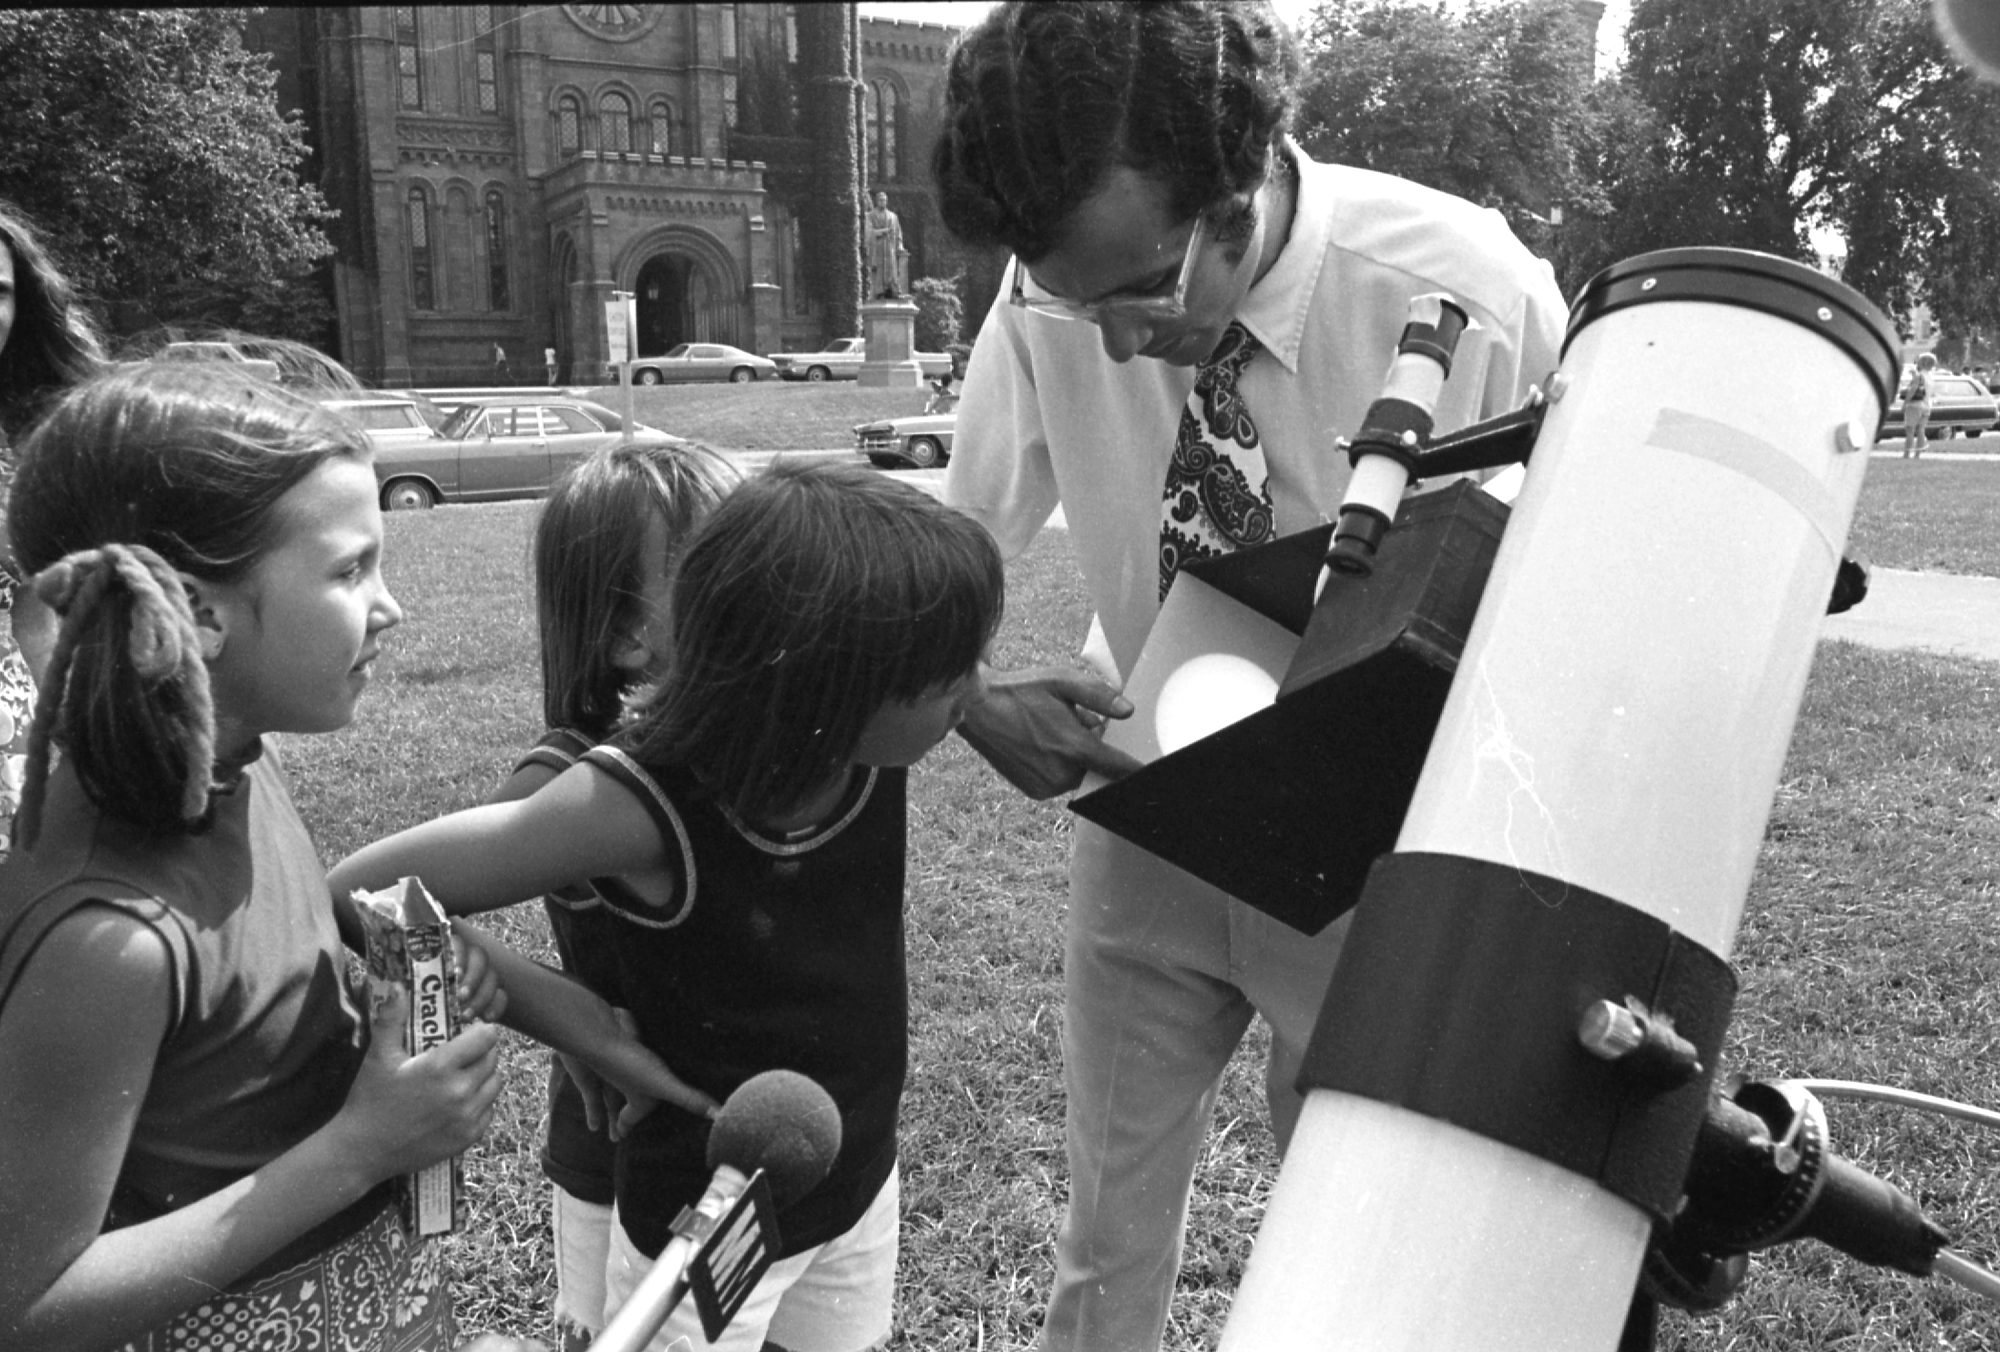 B&W photo of man demonstrating telescope with 2 children observing.